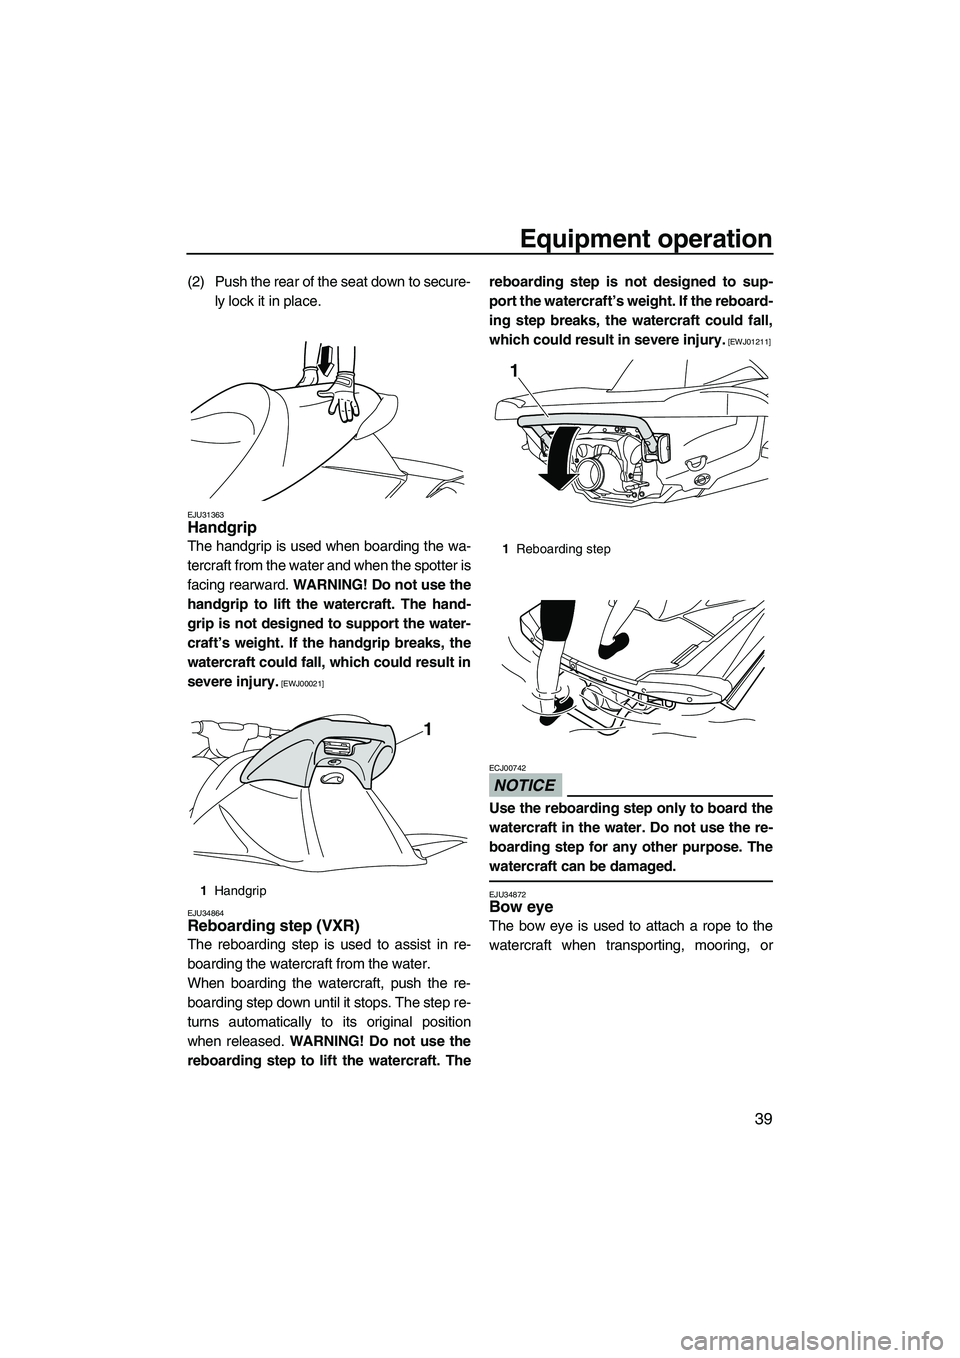 YAMAHA VXS 2012 Service Manual Equipment operation
39
(2) Push the rear of the seat down to secure-
ly lock it in place.
EJU31363Handgrip 
The handgrip is used when boarding the wa-
tercraft from the water and when the spotter is
f